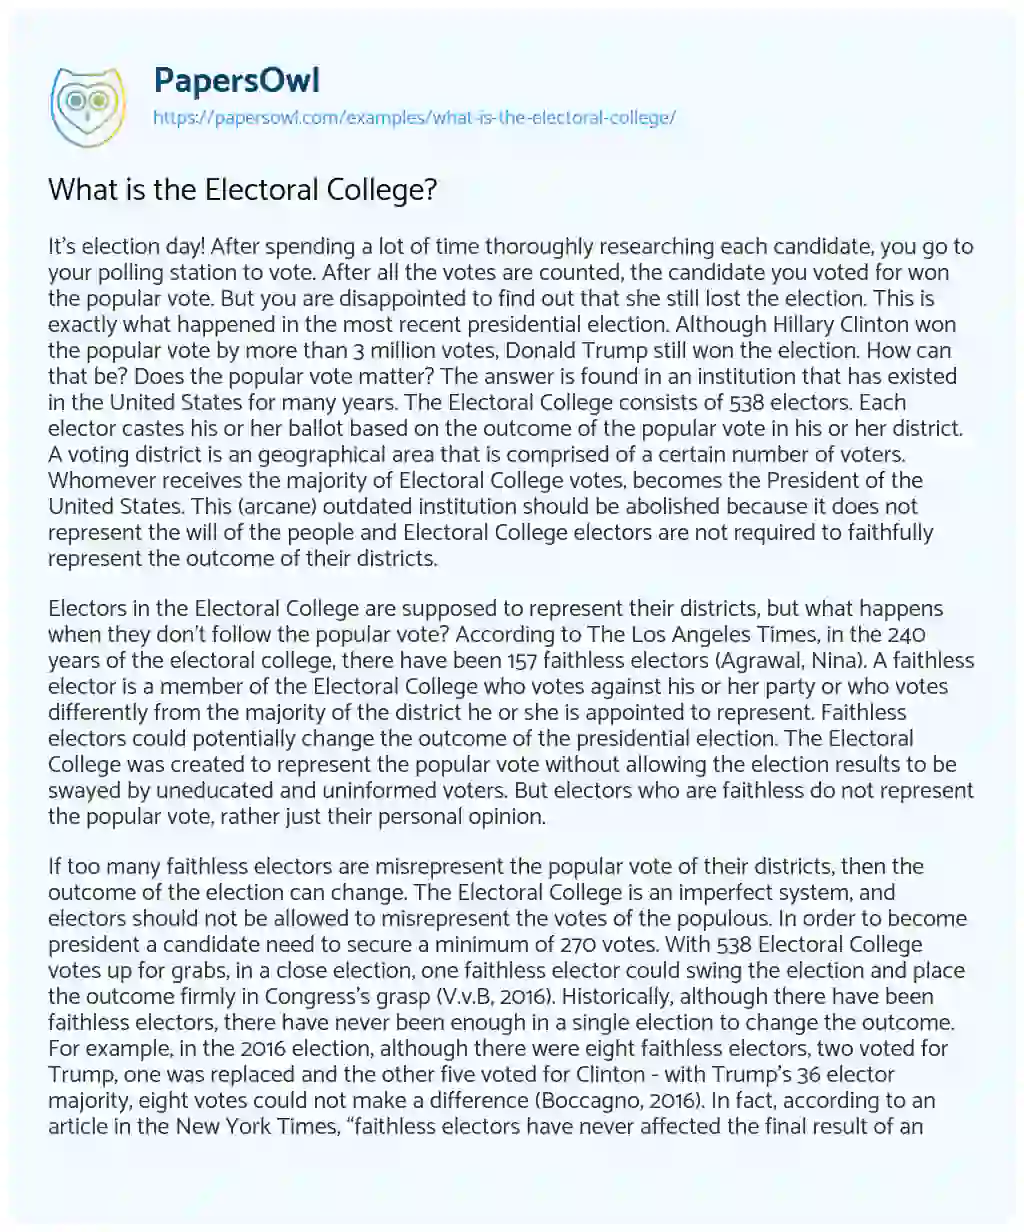 Essay on What is the Electoral College?